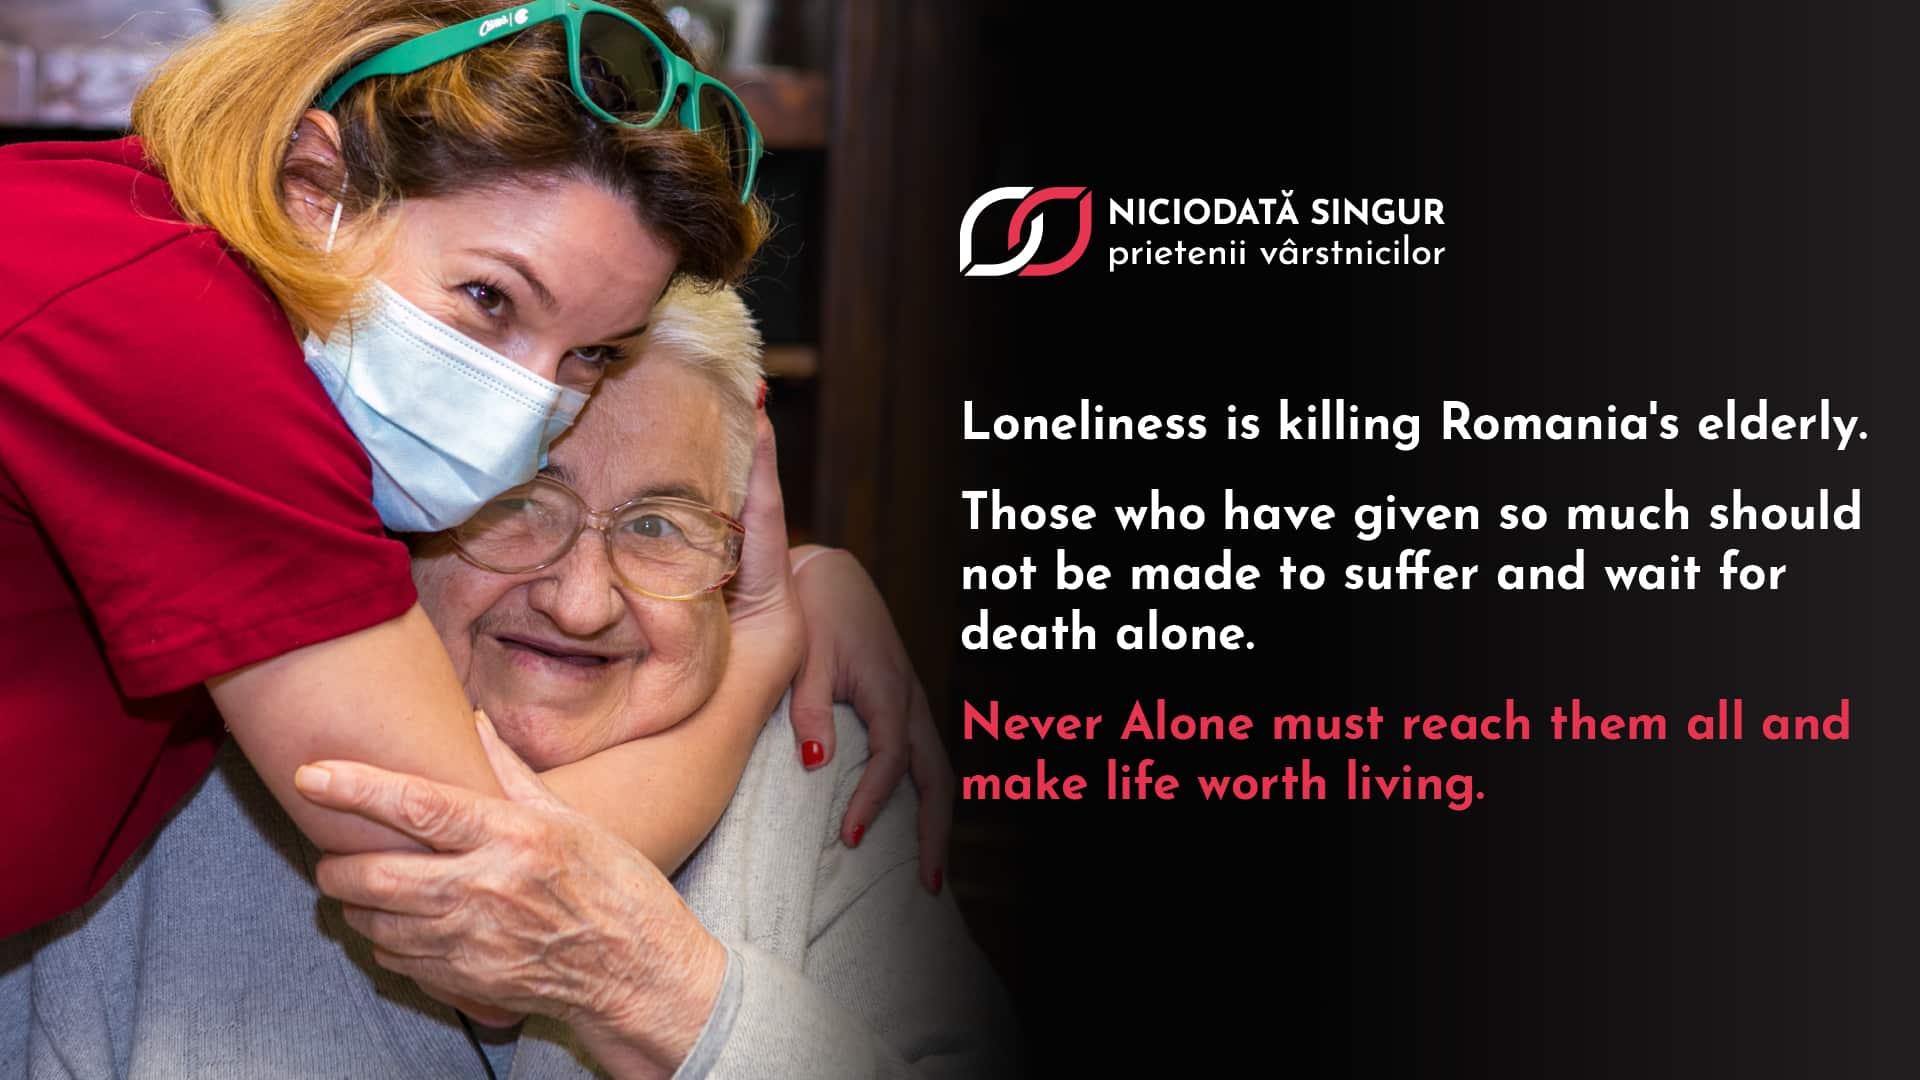 Never Alone's new ambition. Image of a young woman in a face-mask hugging a smiling older person